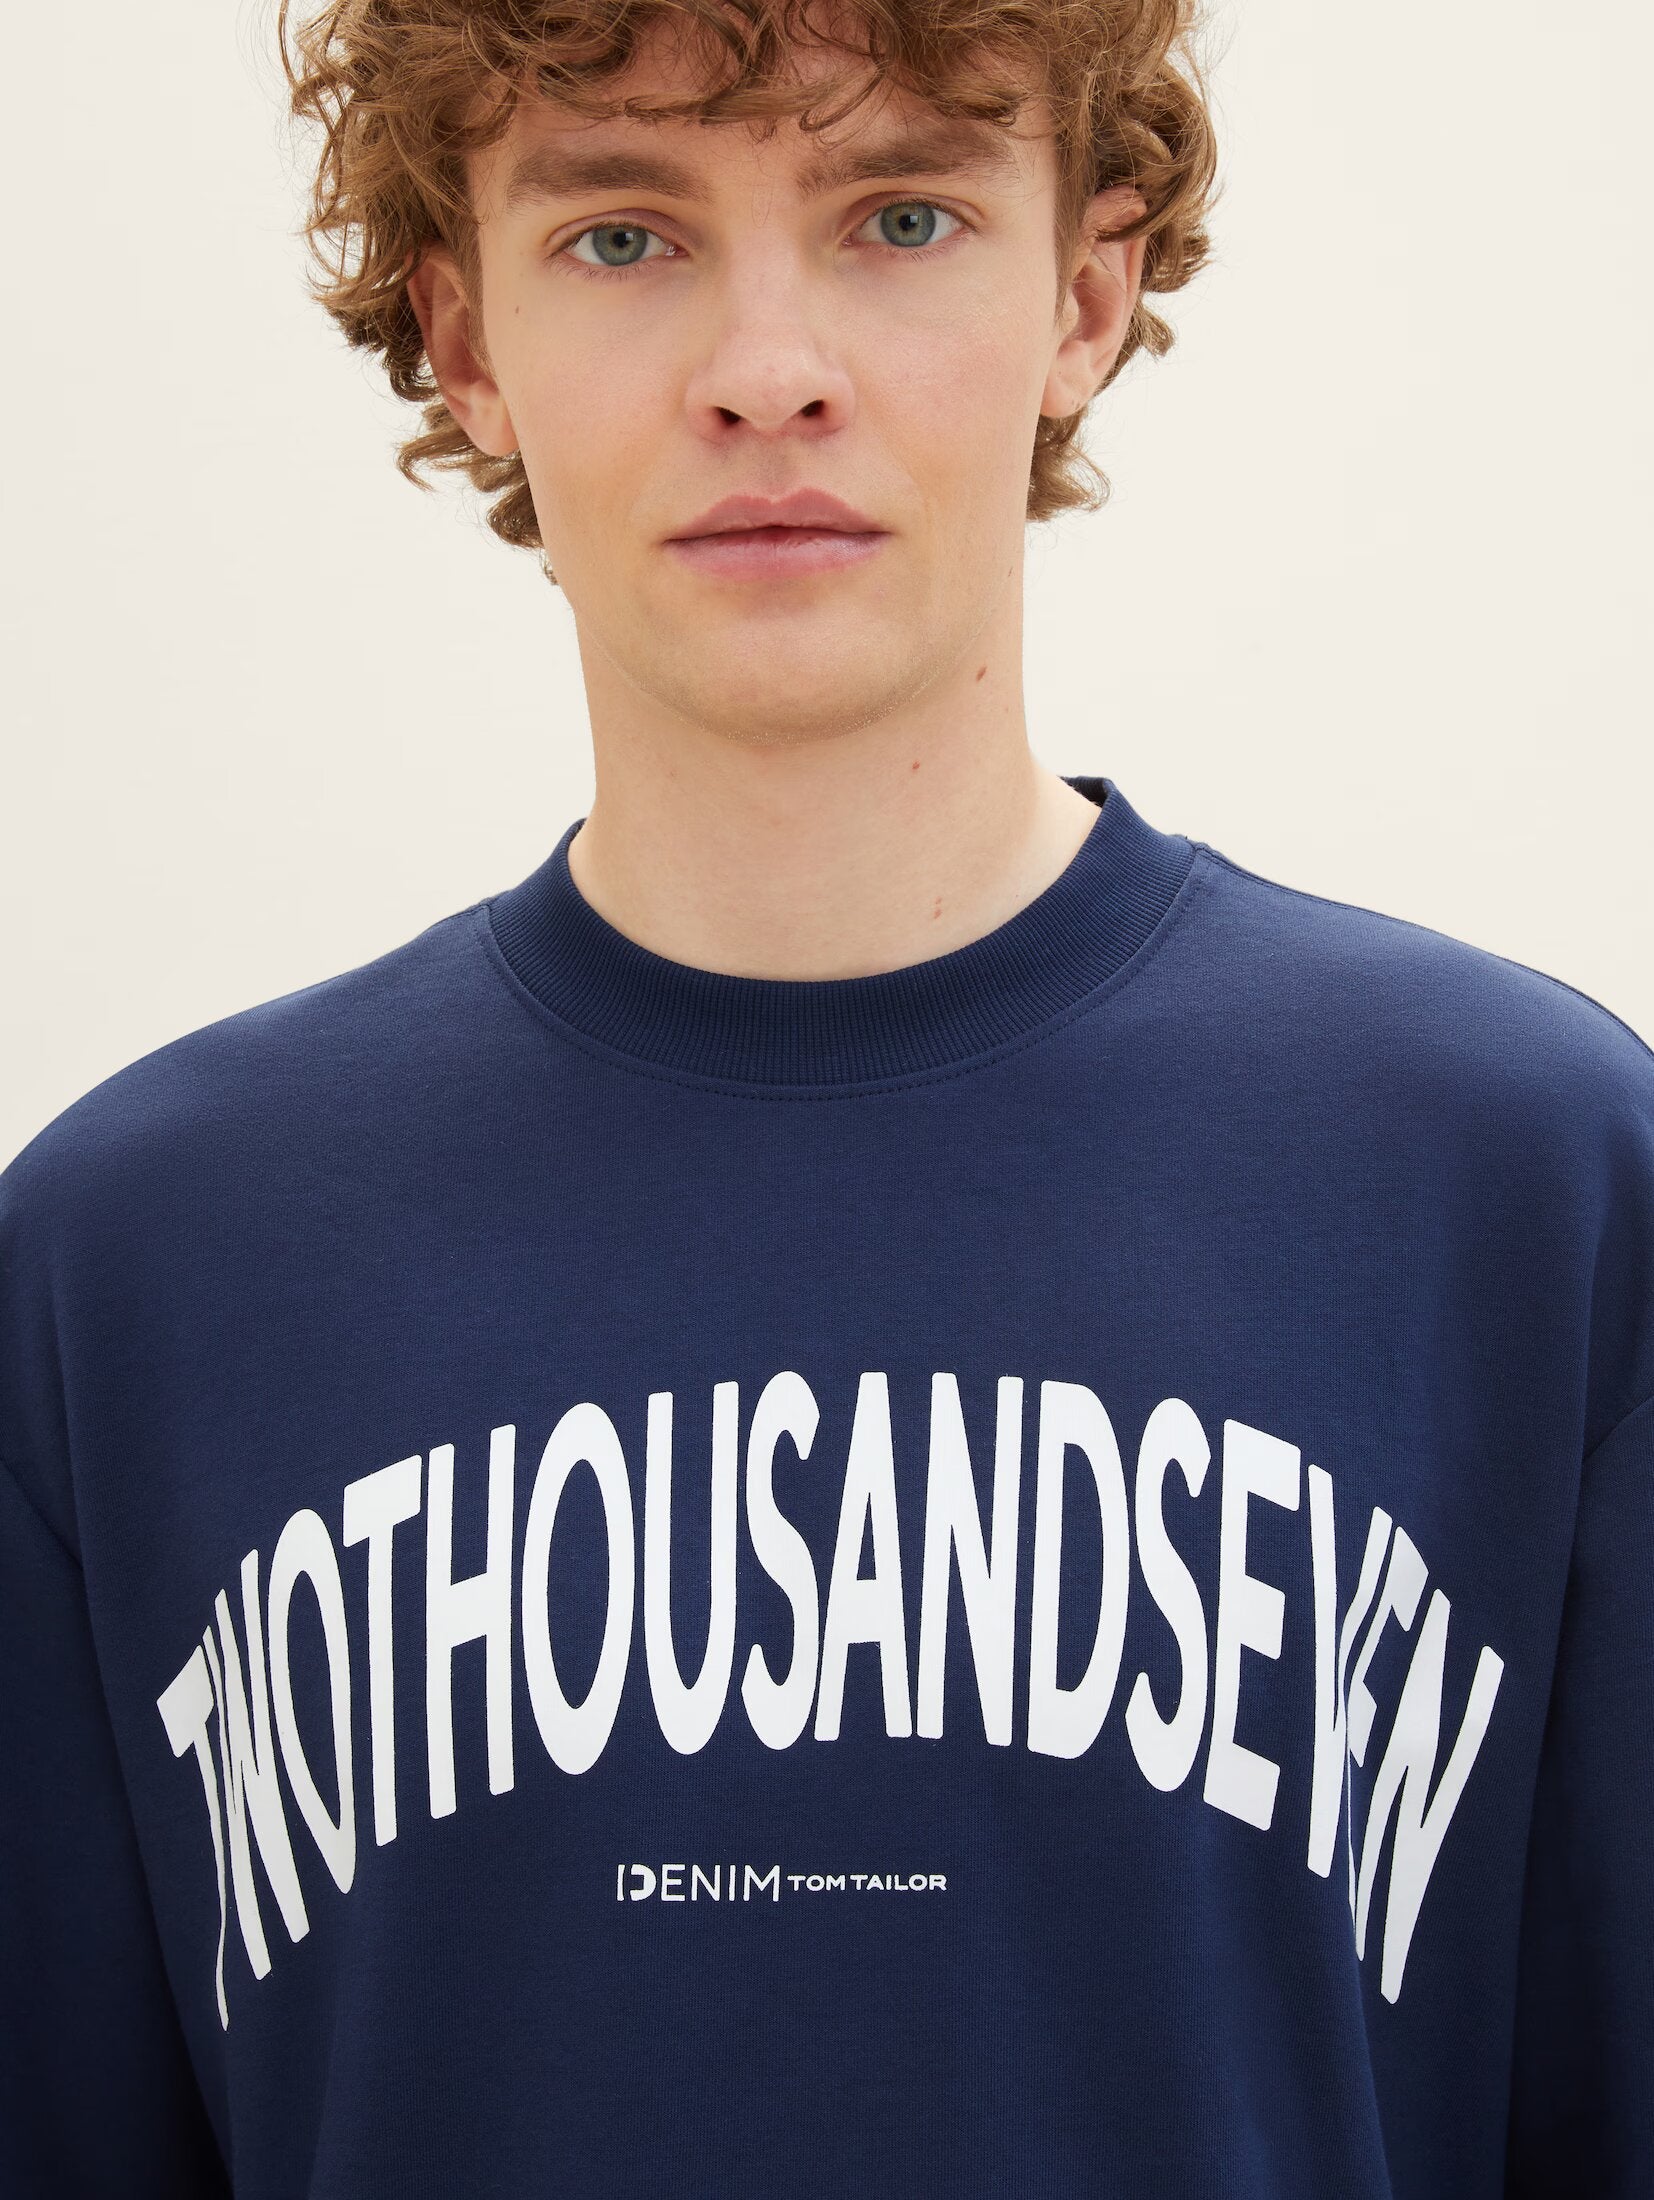 Tom Tailor Dark Blueberry Sweatshirt With a Text Print